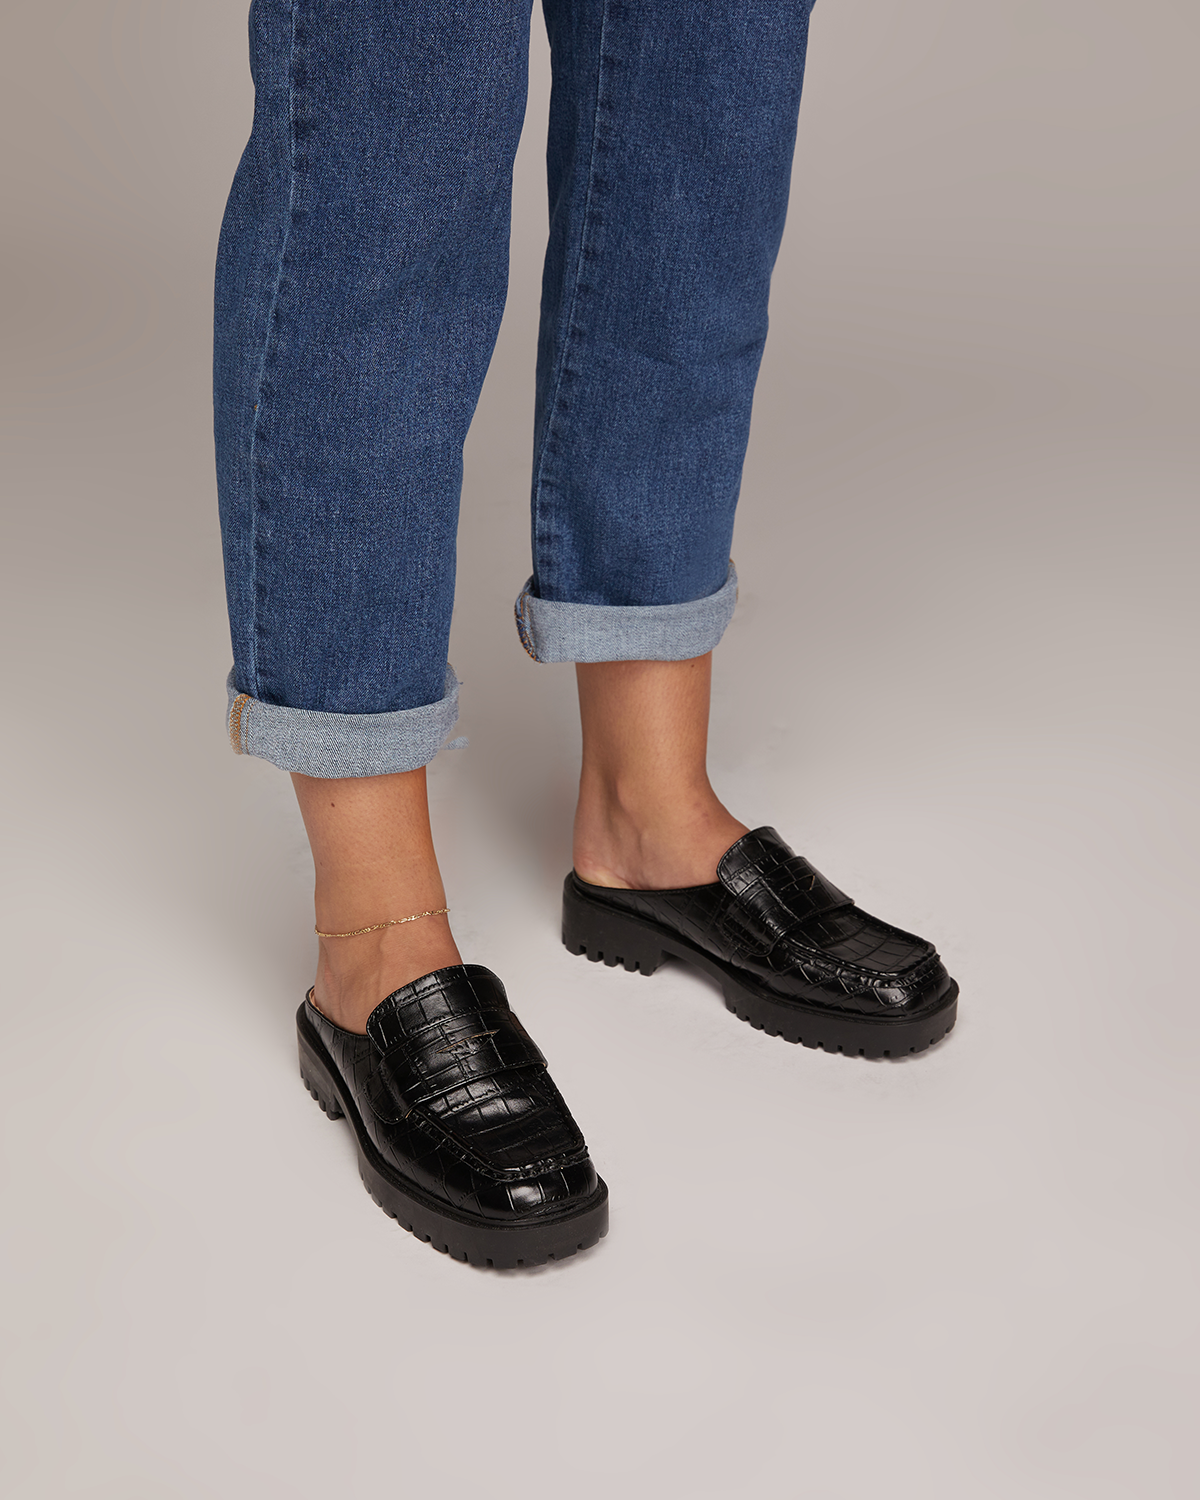 Therapy Shoes Royal Black Croc | Women's Loafers | Flats | Square Toe